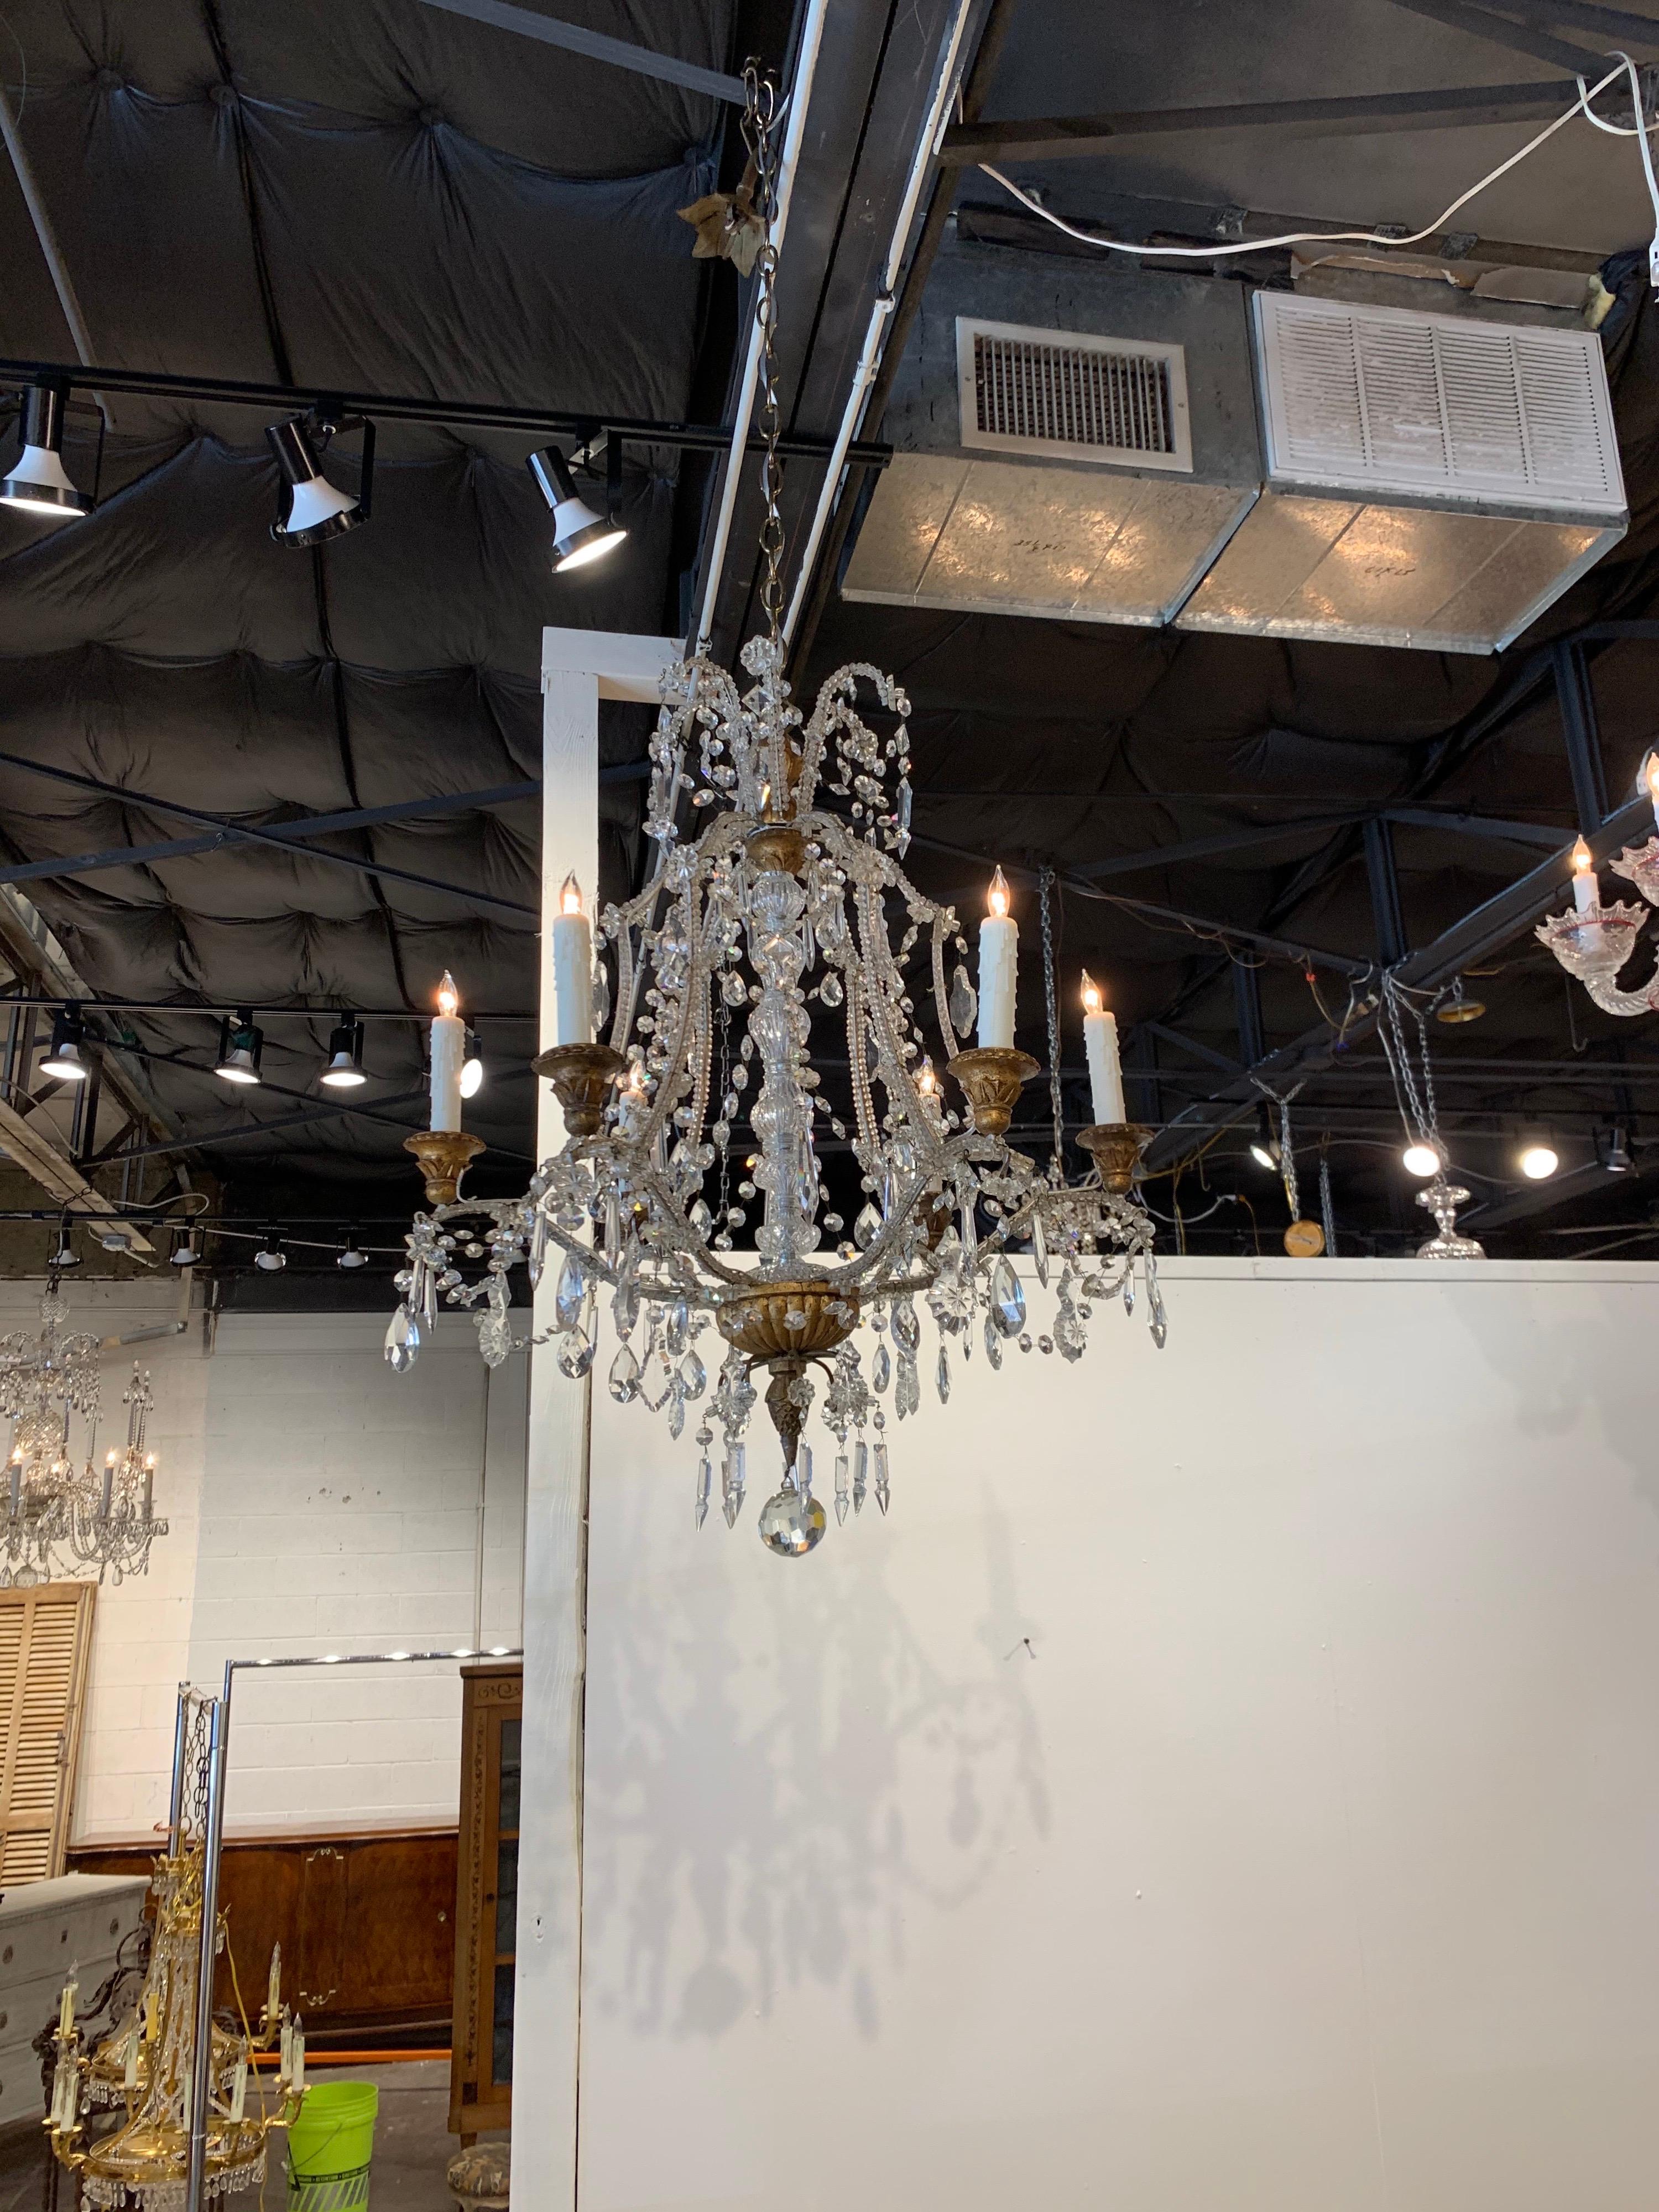 Elegant antique Italian beaded crystal chandelier with 6-light. Beautiful shape and scale to this fixture. And draped with gorgeous crystals. So pretty!